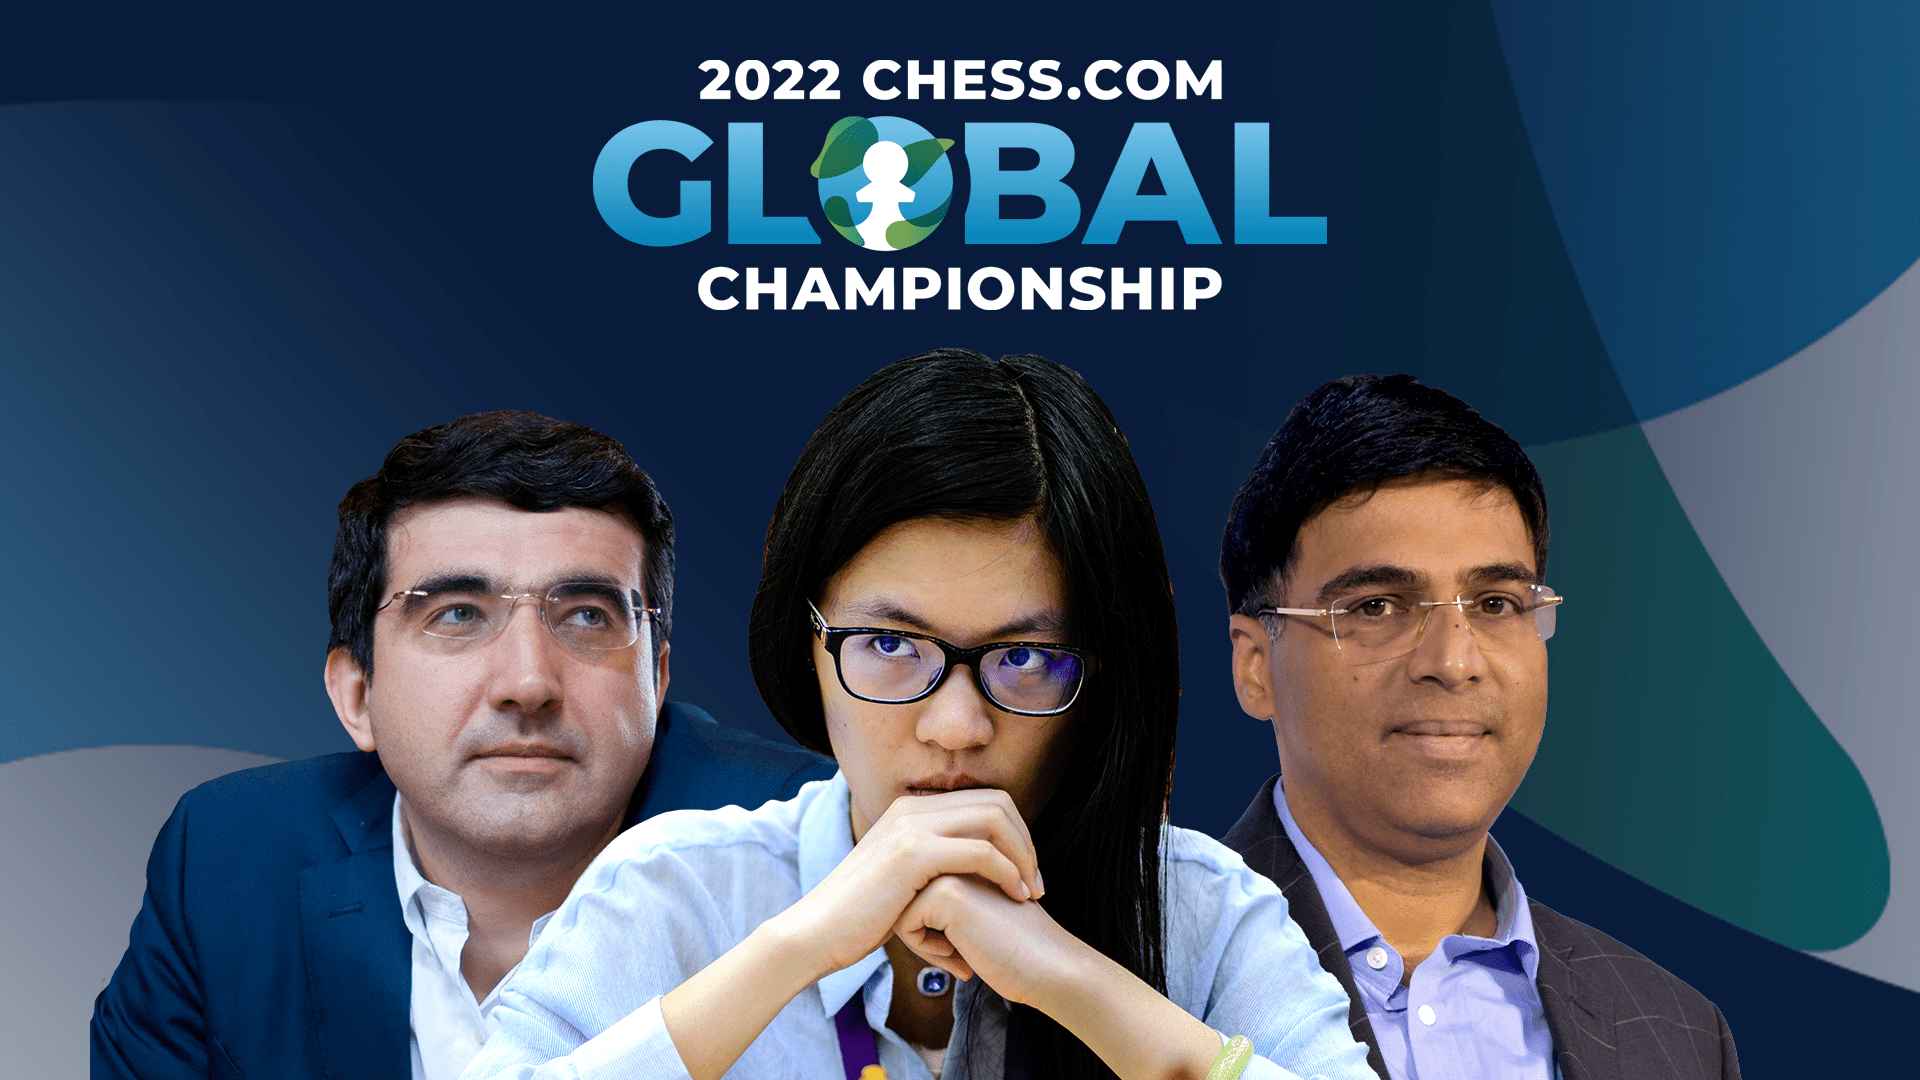 Play Against Legends In The Chess.com Global Championship